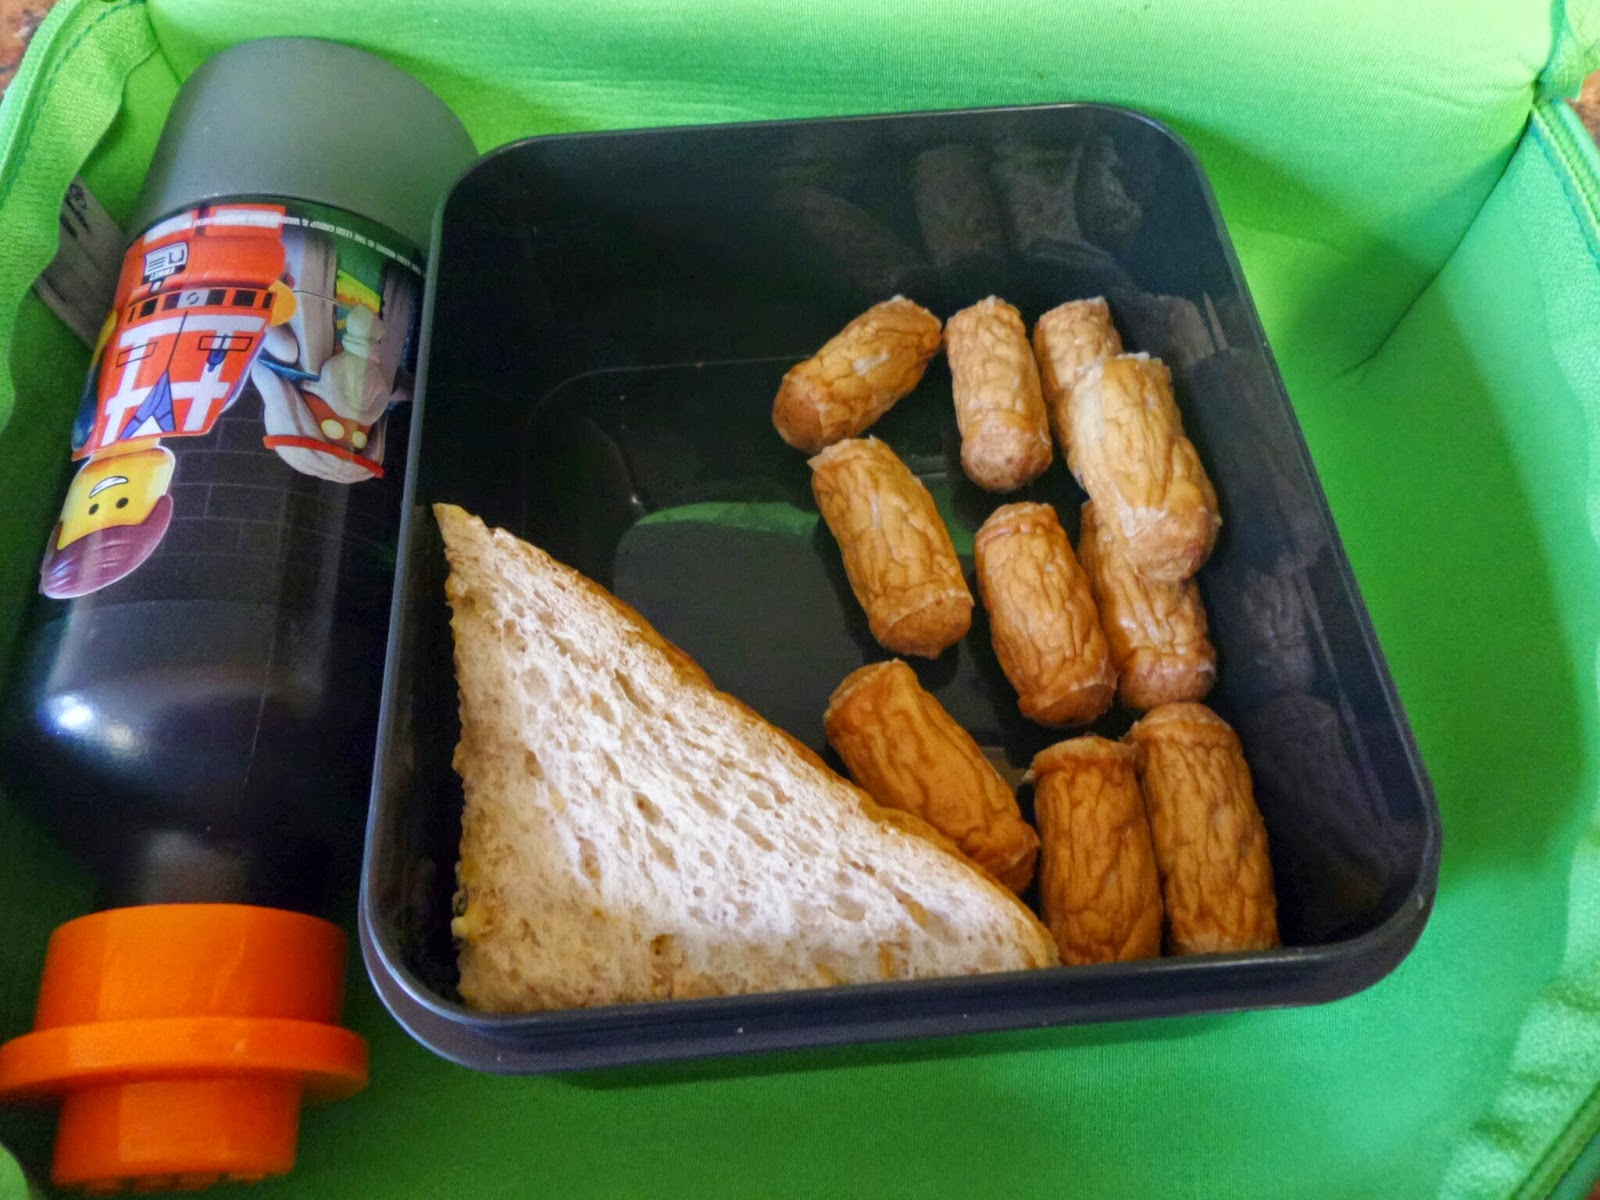 Lego Lunch Set from Store #Review